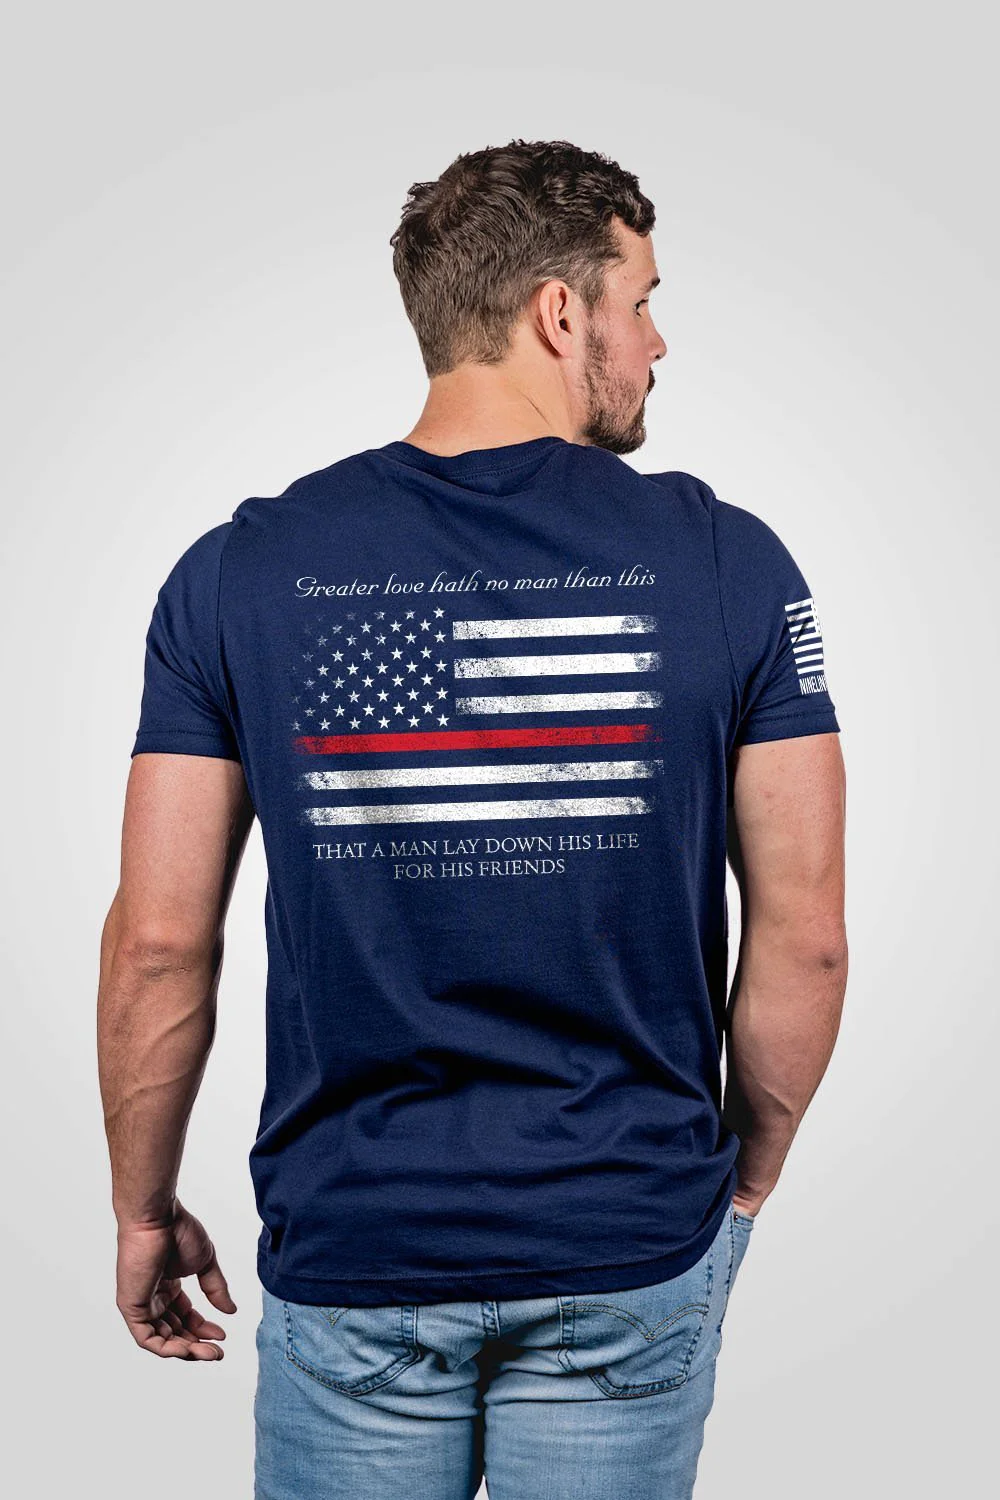 Nine Line Men's Thin Red Line T-Shirt posted by ProdOrigin USA in Men's Apparel